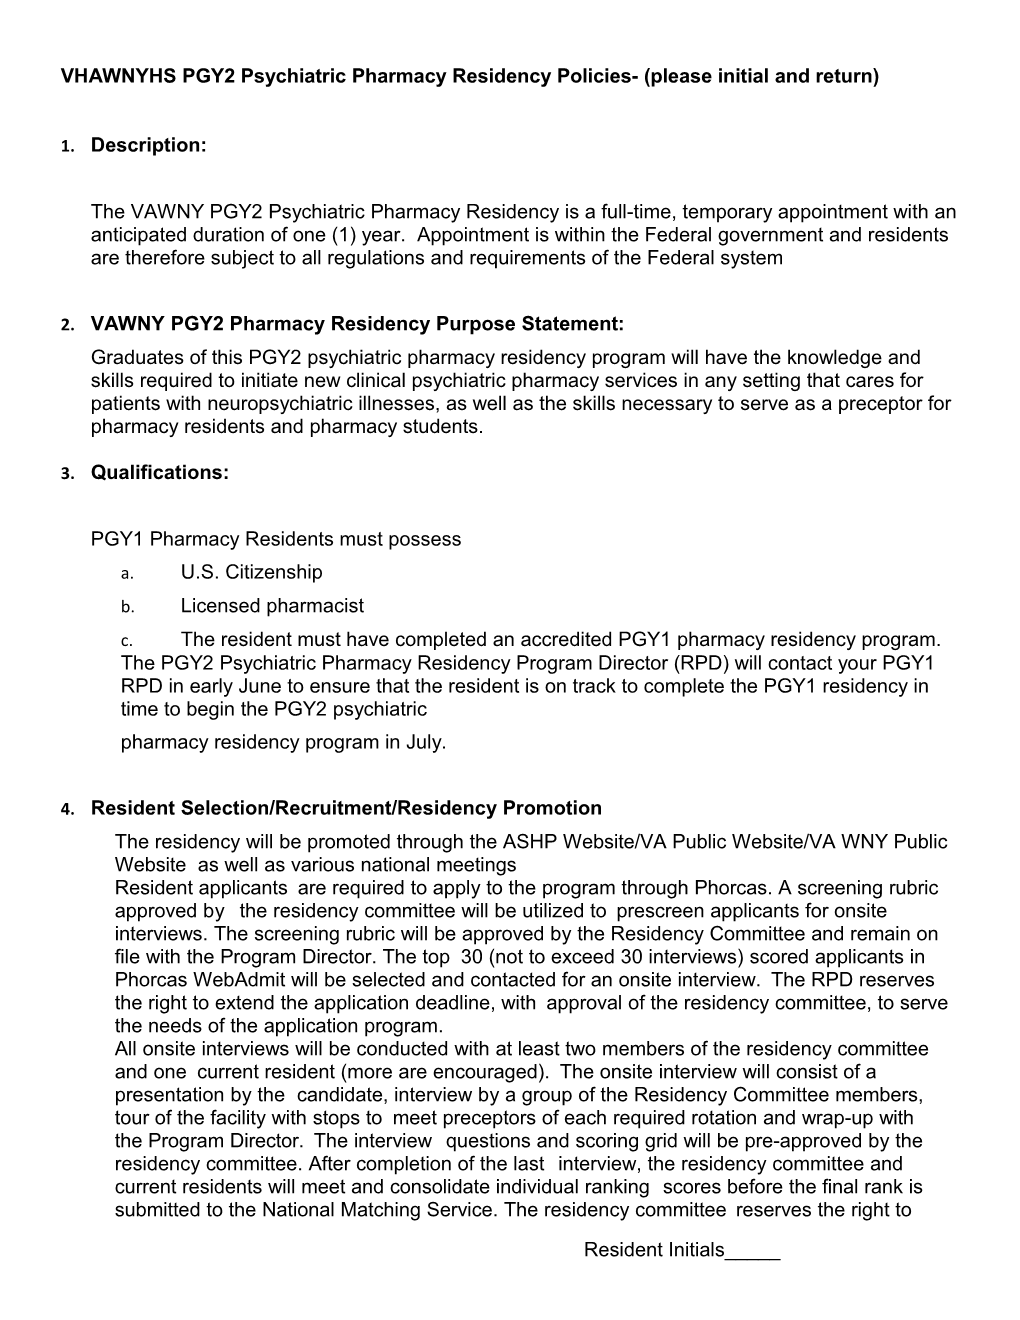 VHAWNYHS PGY2 Psychiatric Pharmacy Residencypolicies- (Please Initial and Return)